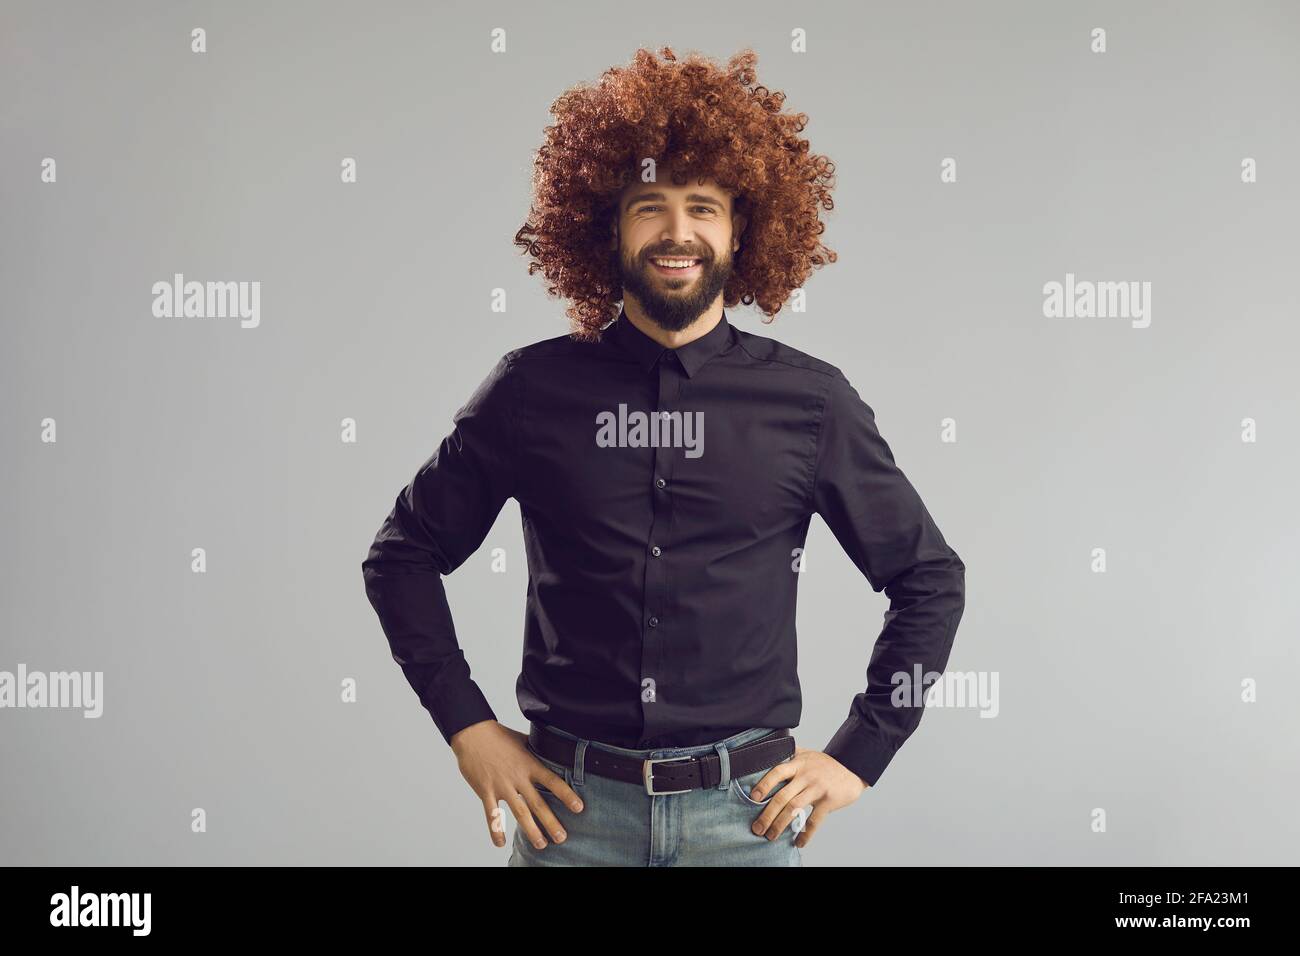 Funny happy man wearing curly brown wig standing hands oh hips on gray background Stock Photo